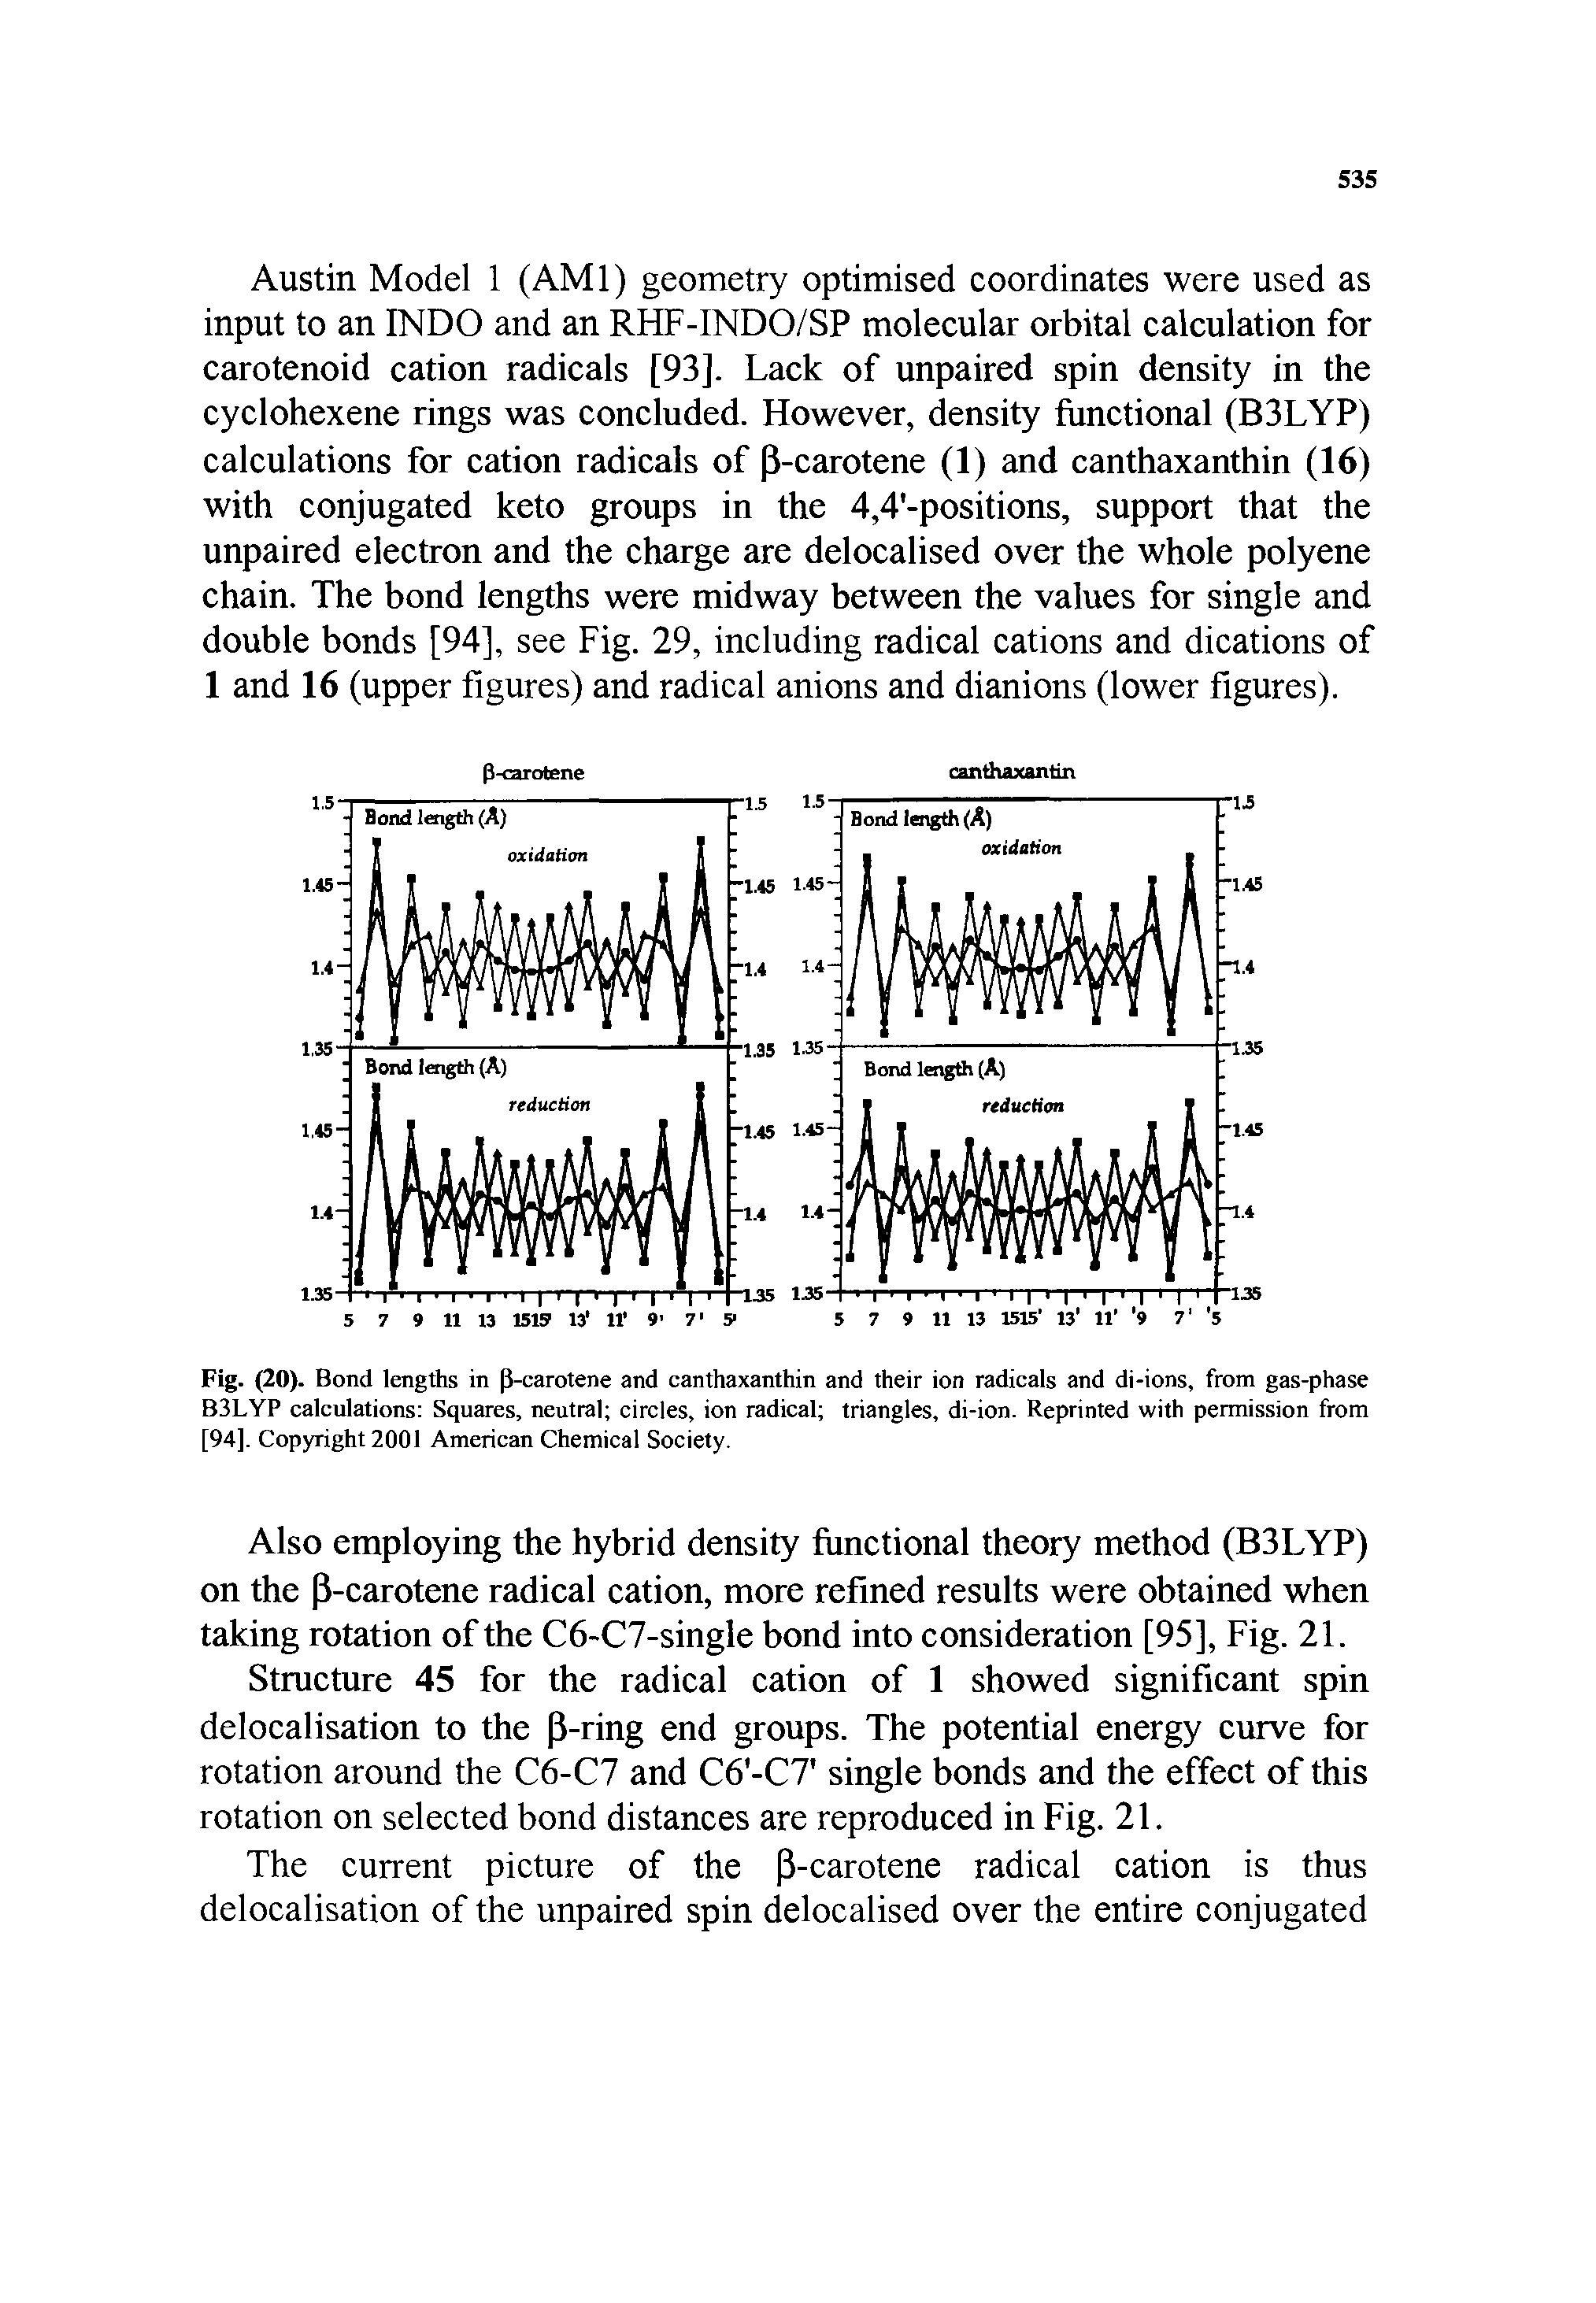 Fig. (20). Bond lengths in P-carotene and canthaxanthin and their ion radicals and di-ions, from gas-phase B3LYP calculations Squares, neutral circles, ion radical triangles, di-ion. Reprinted with permission from [94]. Copyright 2001 American Chemical Society.